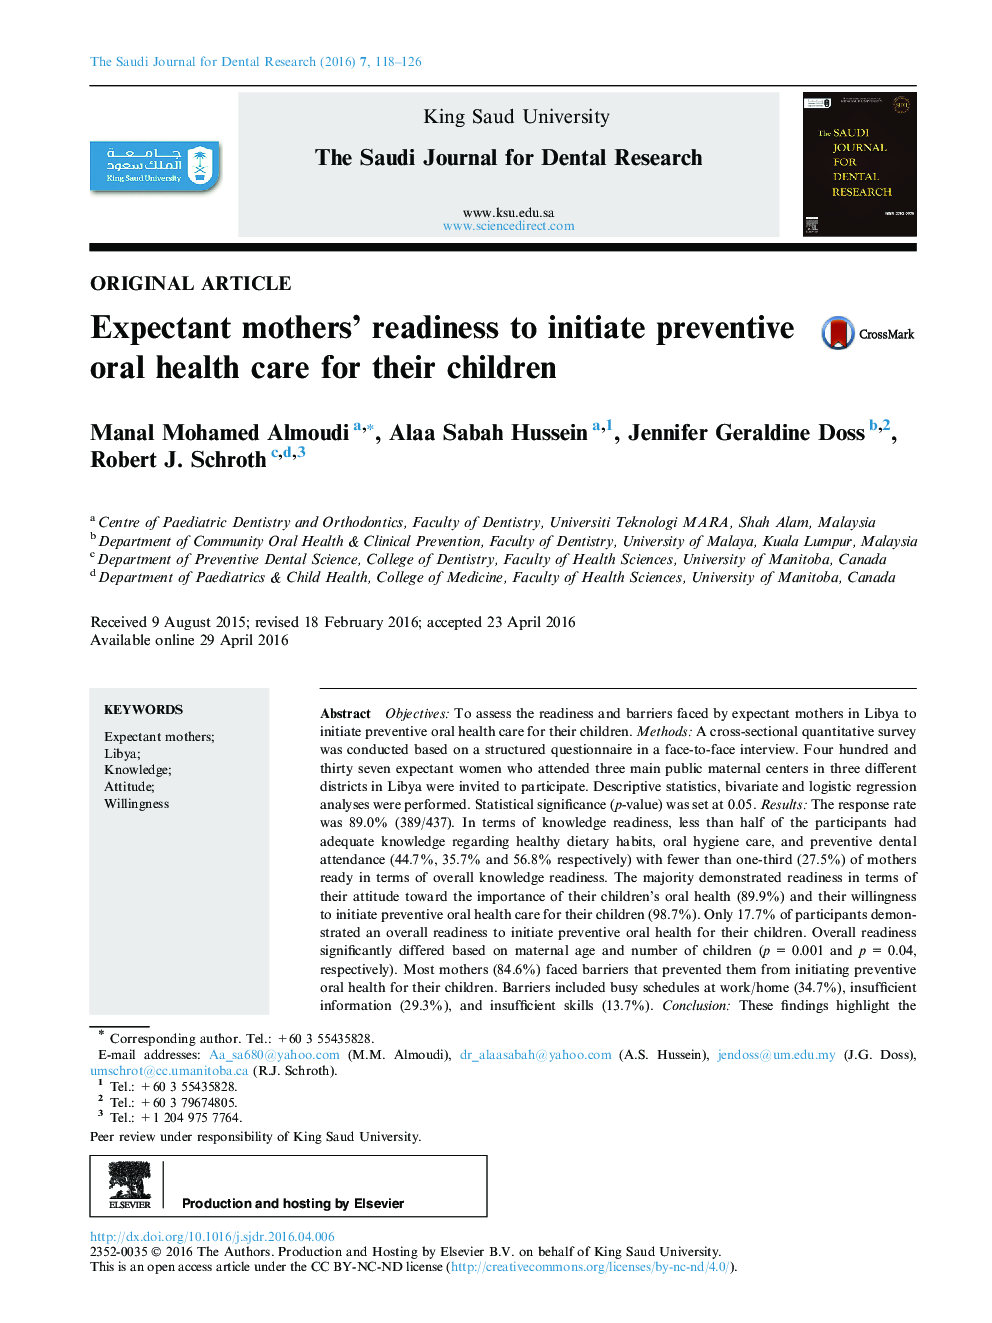 Expectant mothers’ readiness to initiate preventive oral health care for their children 